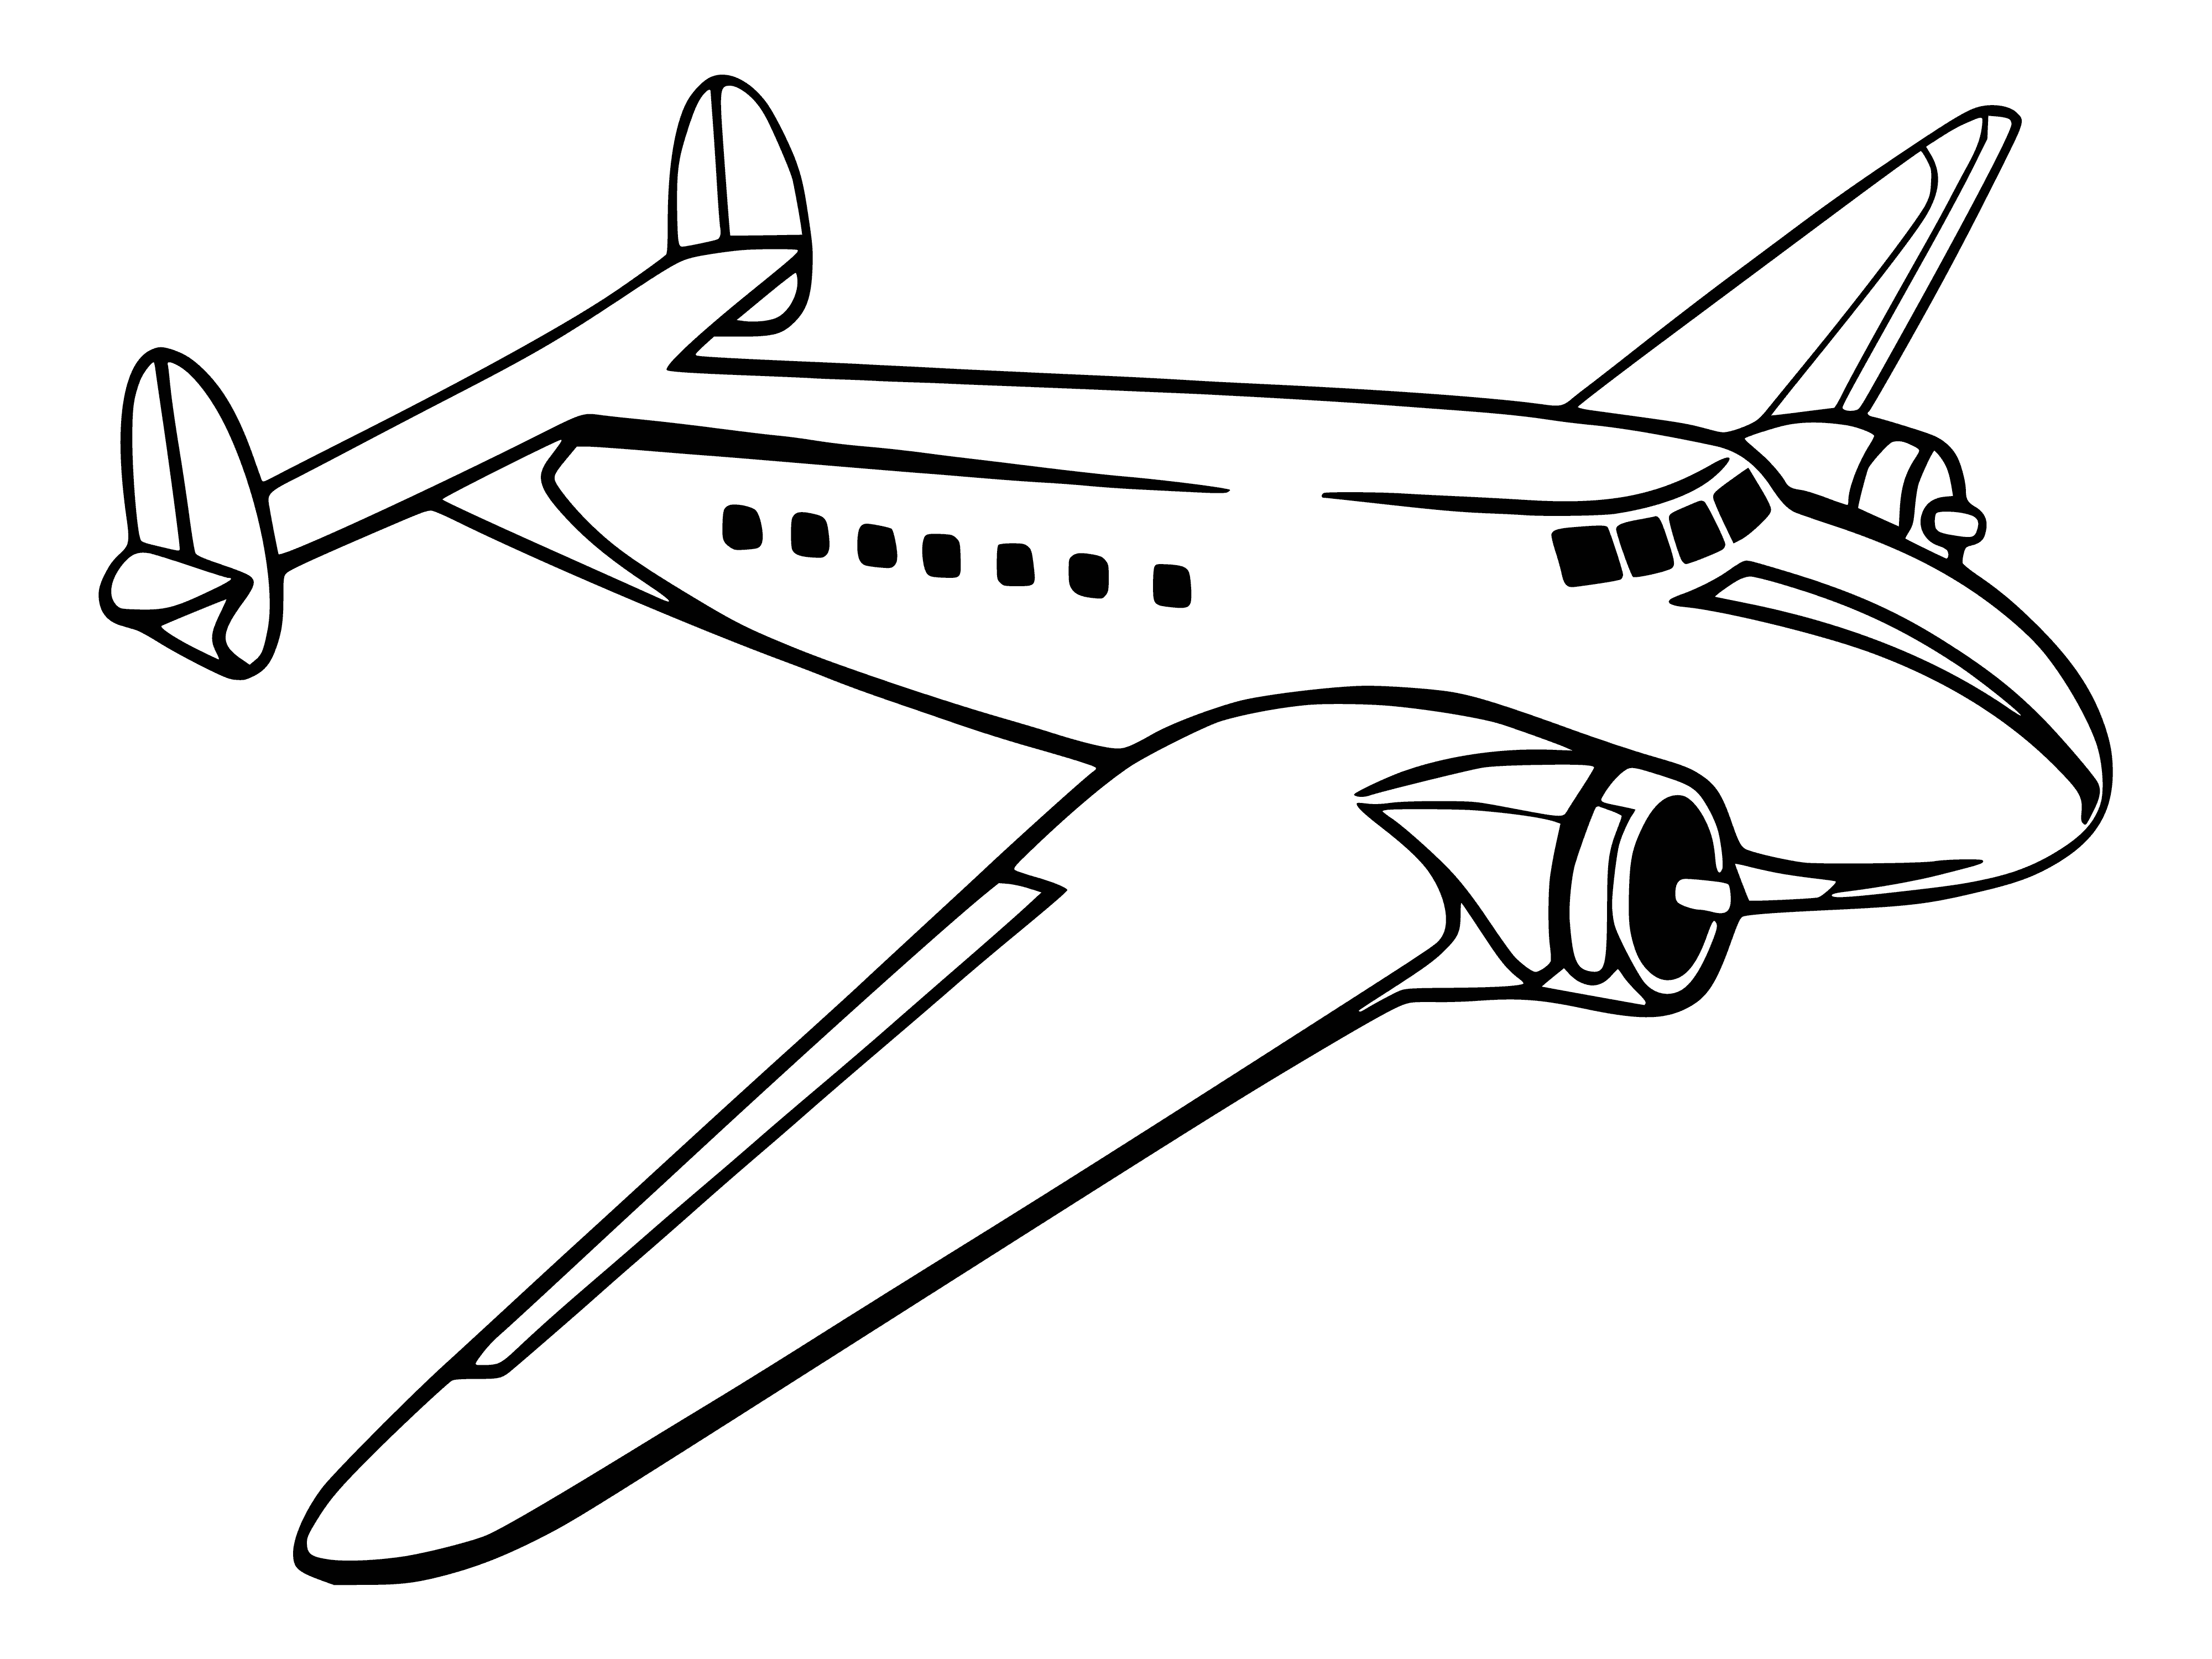 coloring page: Large metal object with wings & wheels; entrance at the front for people to walk through. #Aircraft